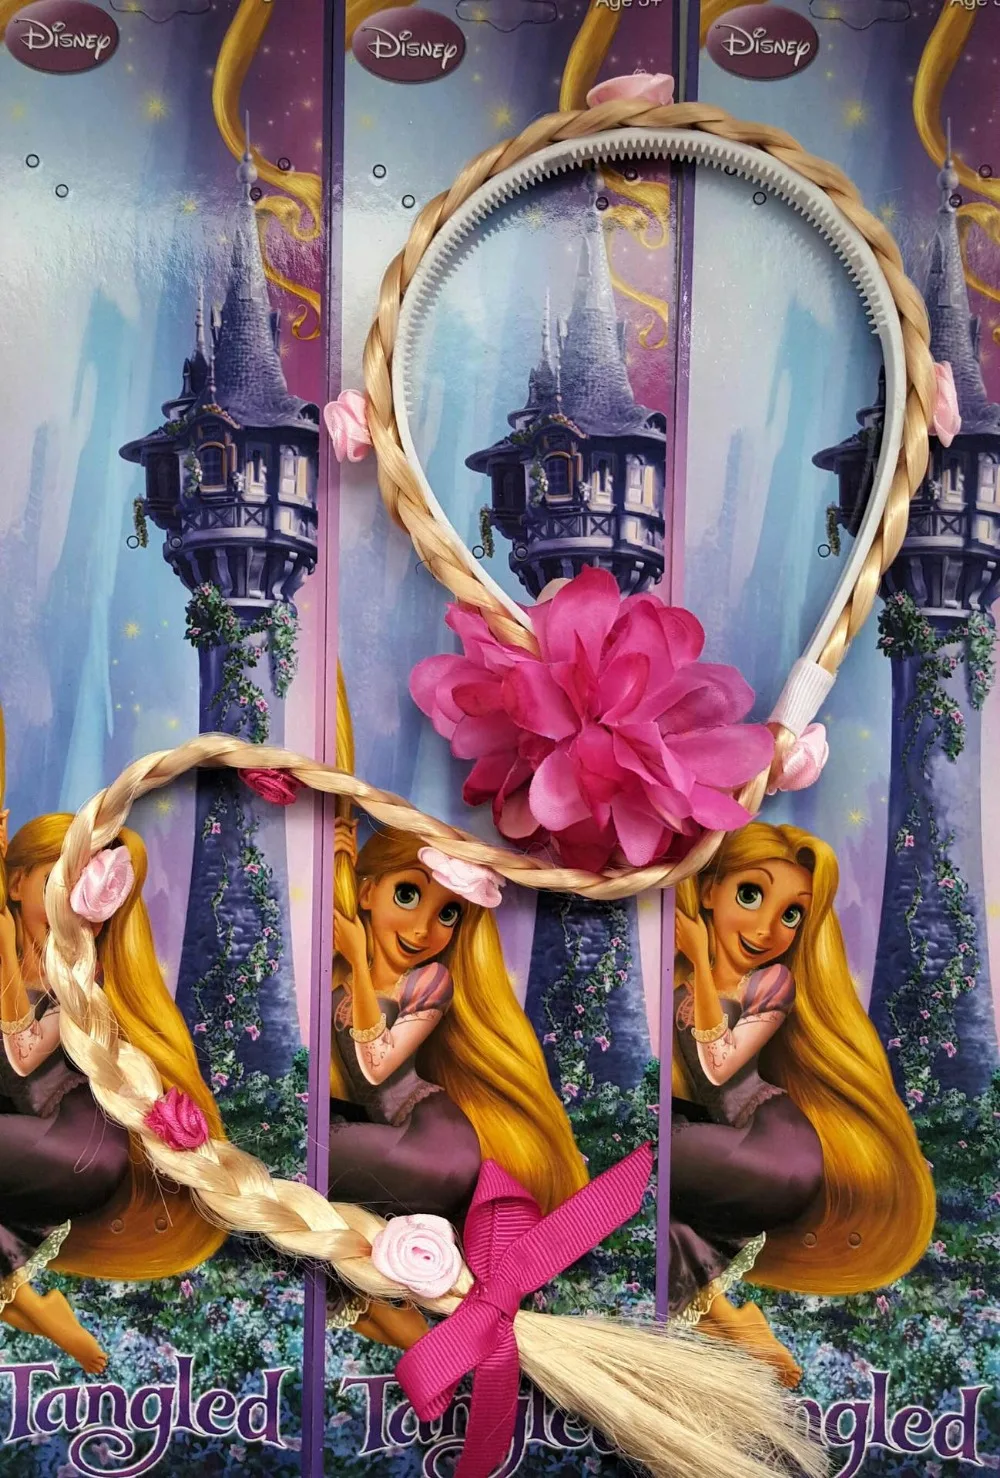 Rapunzel Princess long wig cosplay Animation wig for kids Cosplay Weaving Braid  Tangled Rapunzel Headband Hair wig - AliExpress Novelty & Special Use